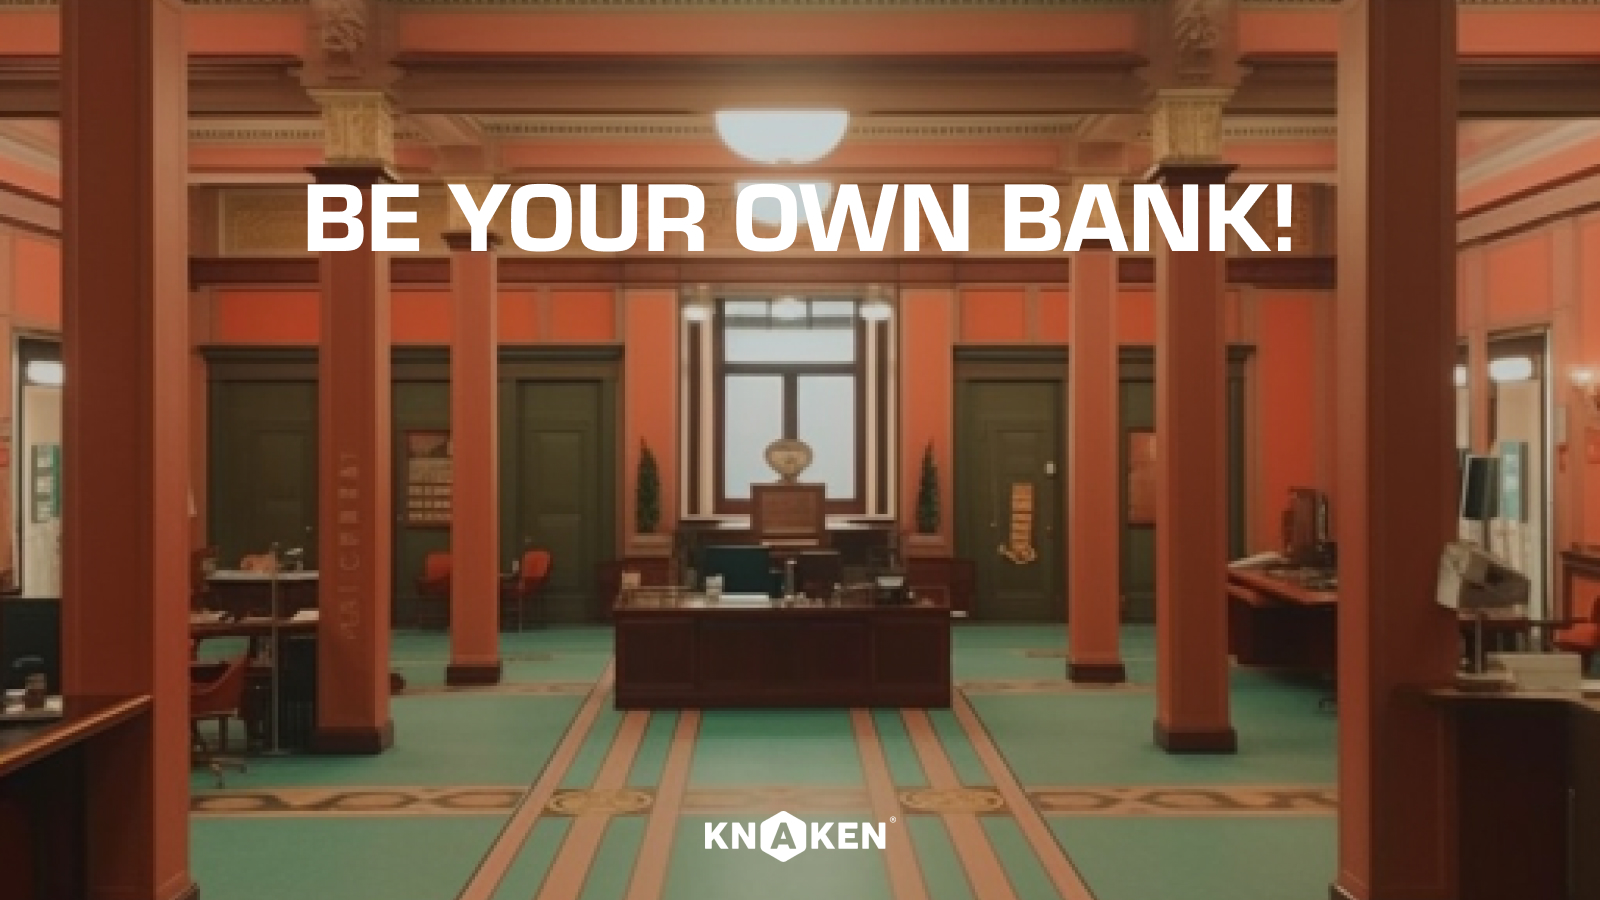 Be your own bank!